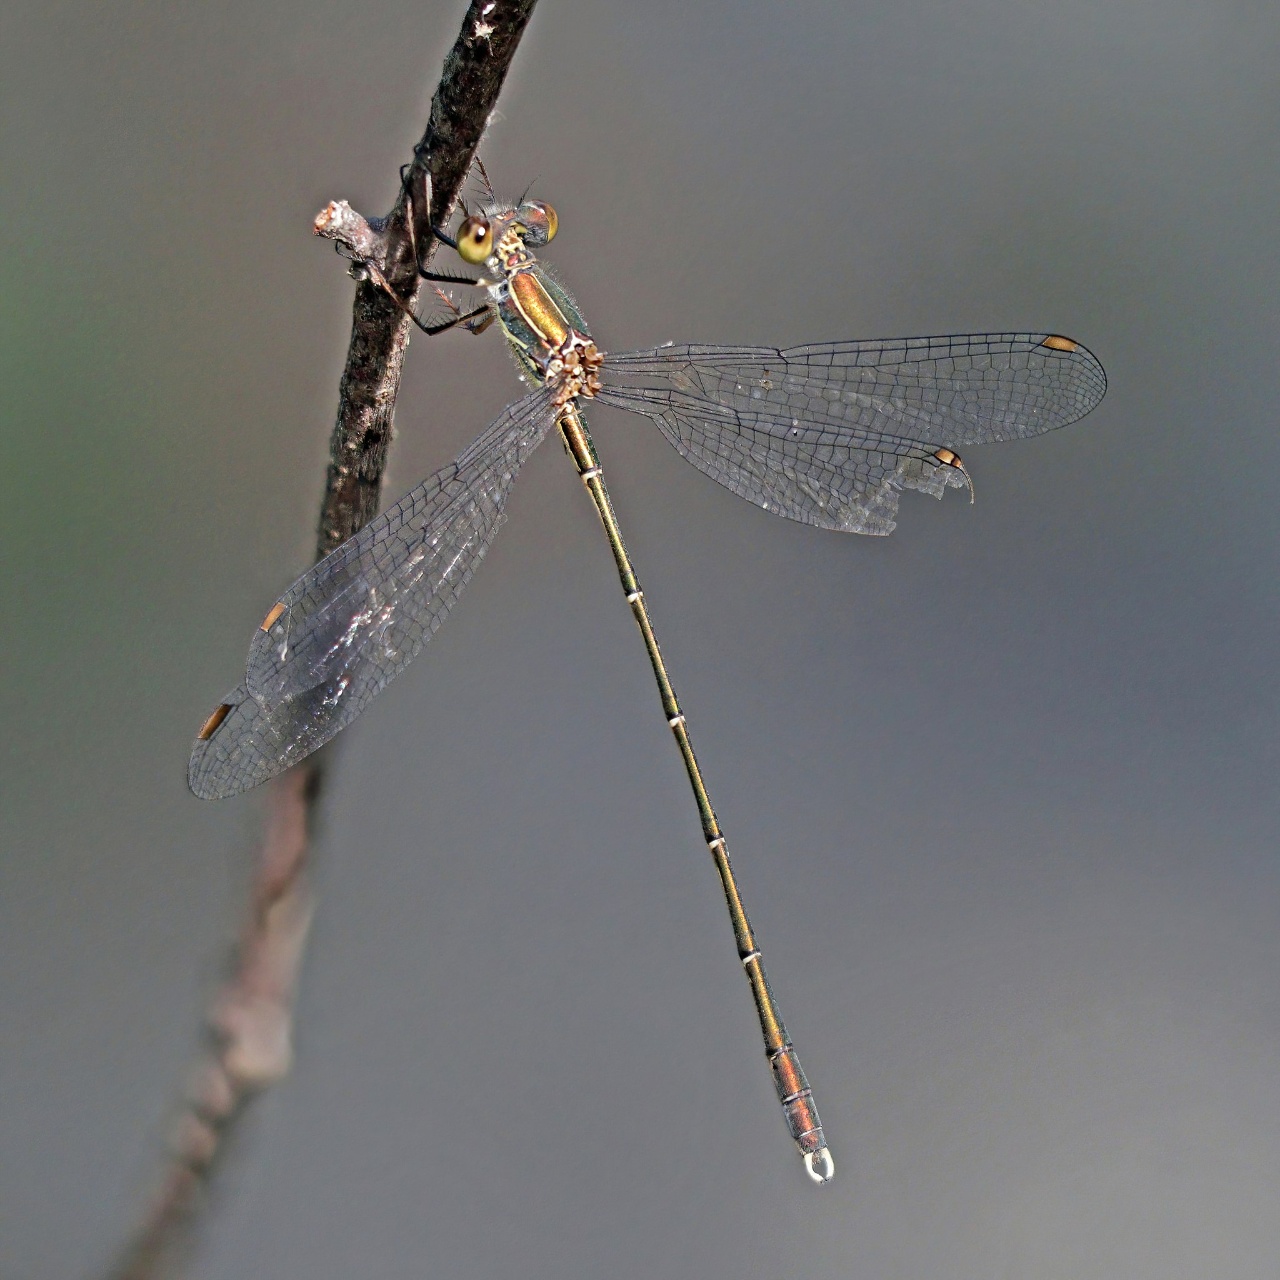 Leste italien - Chalcolestes parvidens - <a href='https://commons.wikimedia.org/wiki/File:Eastern_willow_spreadwing_(Chalcolestes_parvidens)_male.jpg'>Charles J. Sharp</a>, <a href='https://creativecommons.org/licenses/by-sa/4.0'>CC BY-SA 4.0</a>, via Wikimedia Commons - BioObs